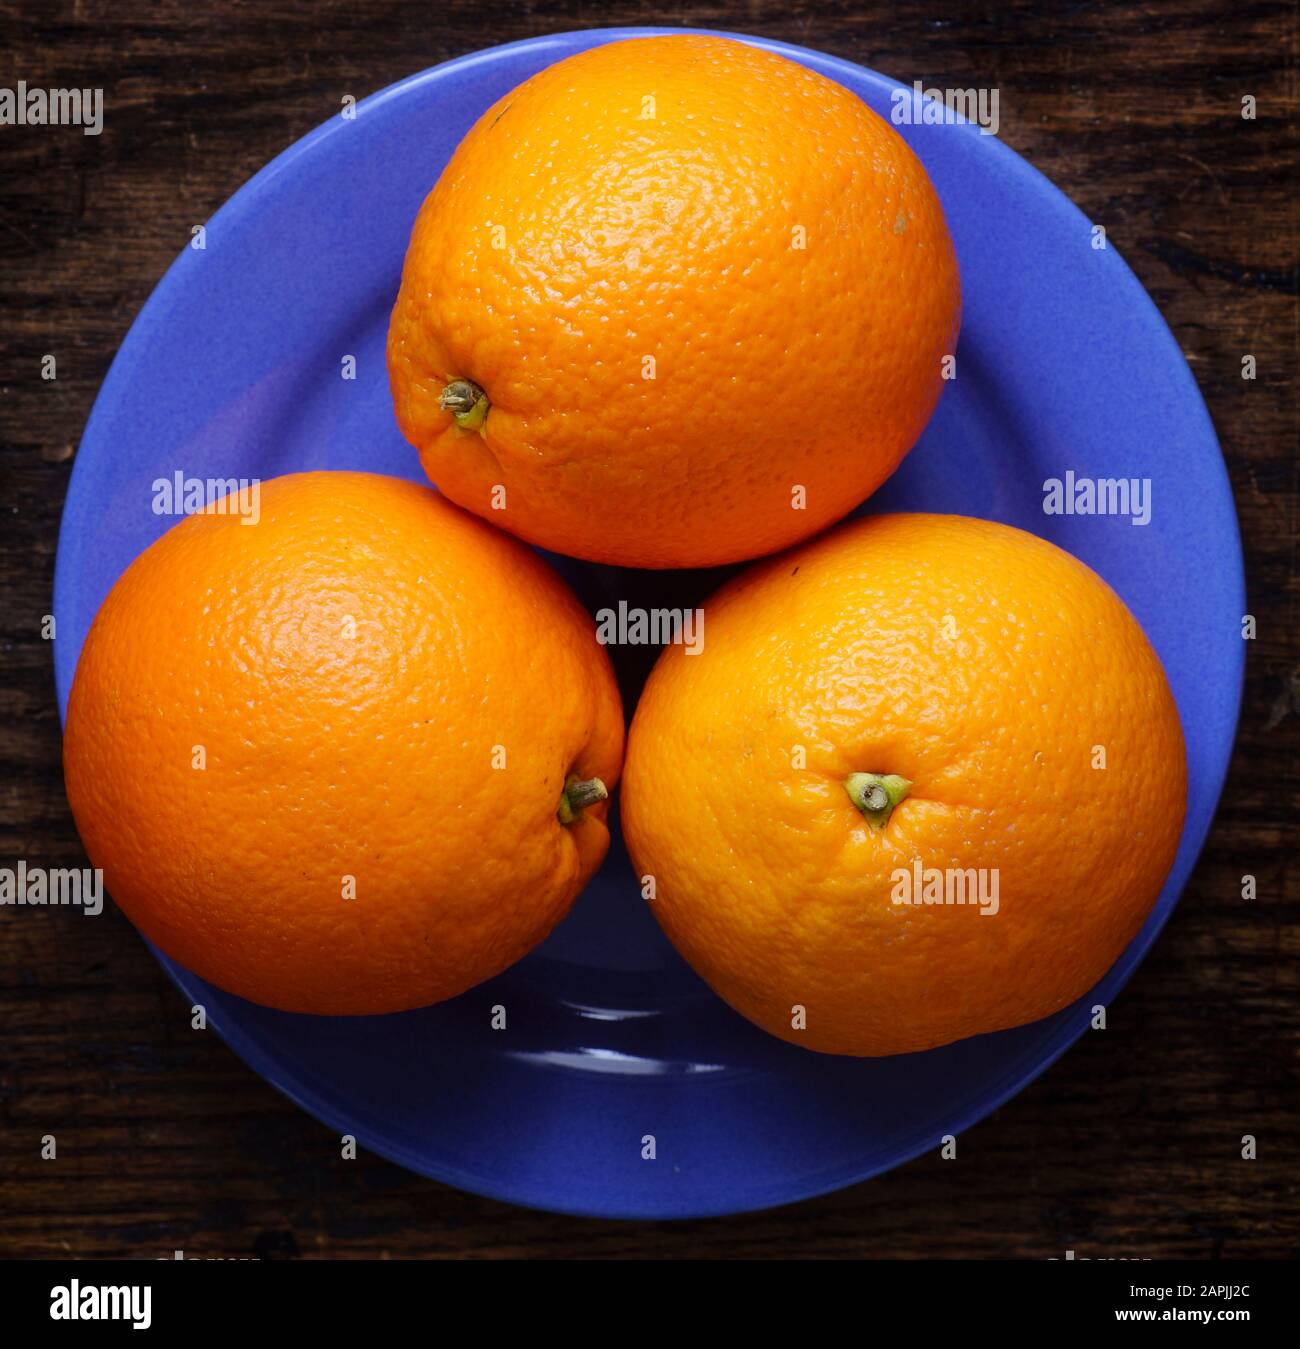 Arrangement of whole oranges on dark background.  Small group of objects. Stock Photo